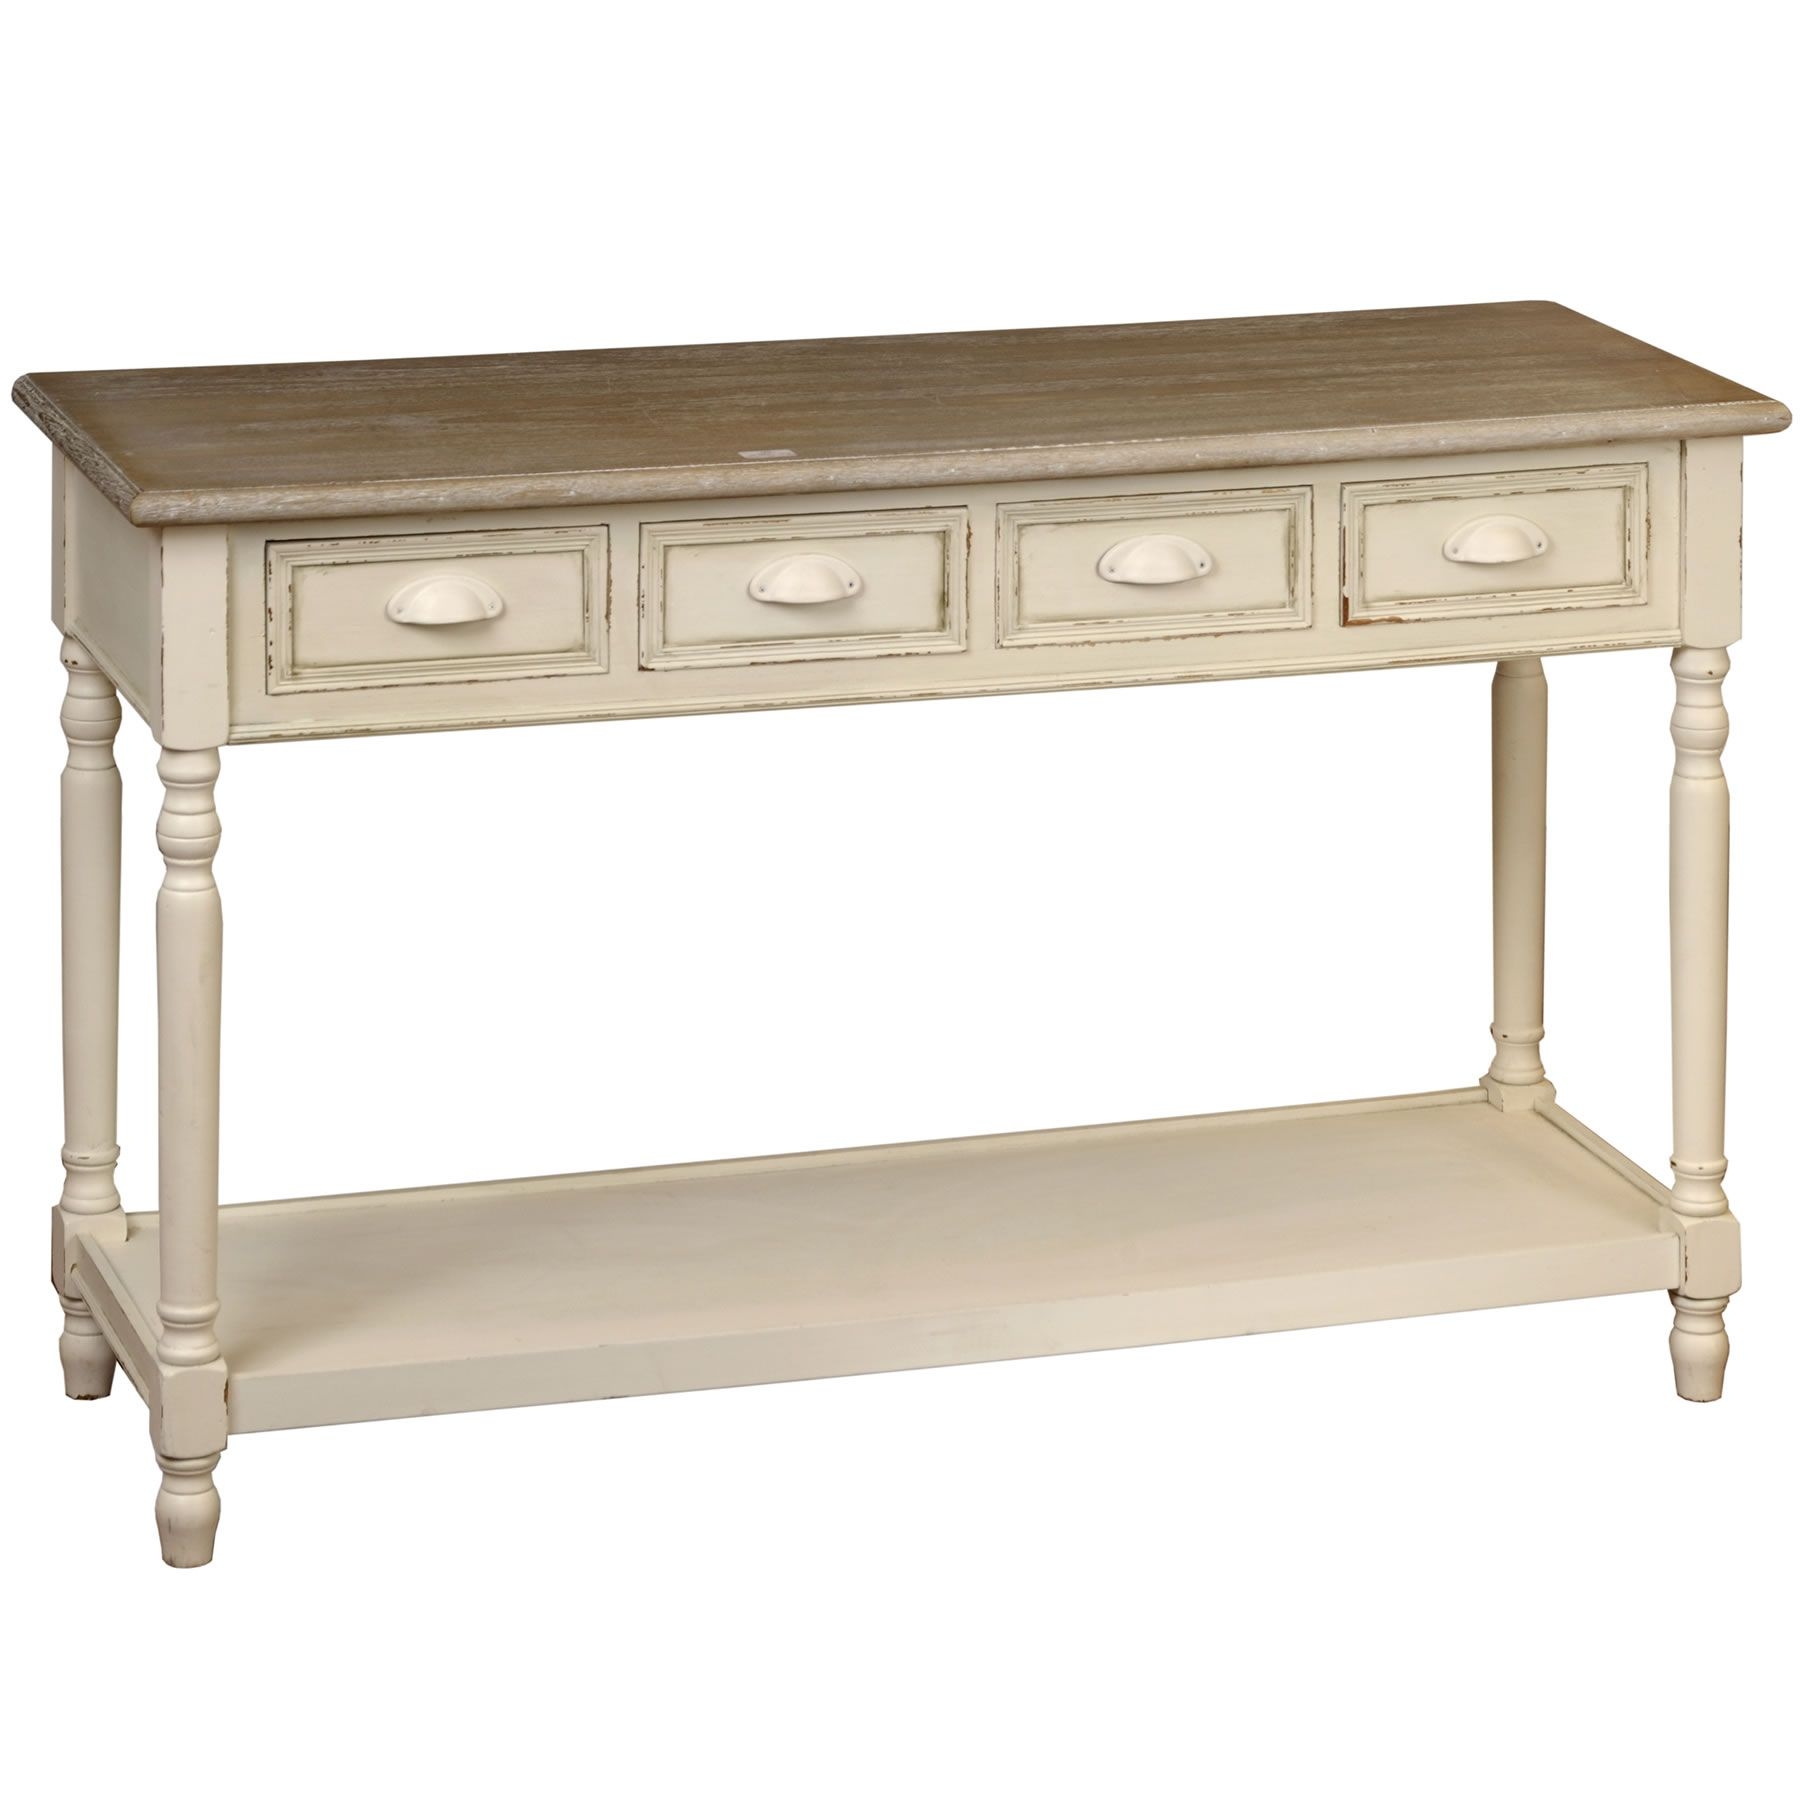 Console table with drawers and shelves